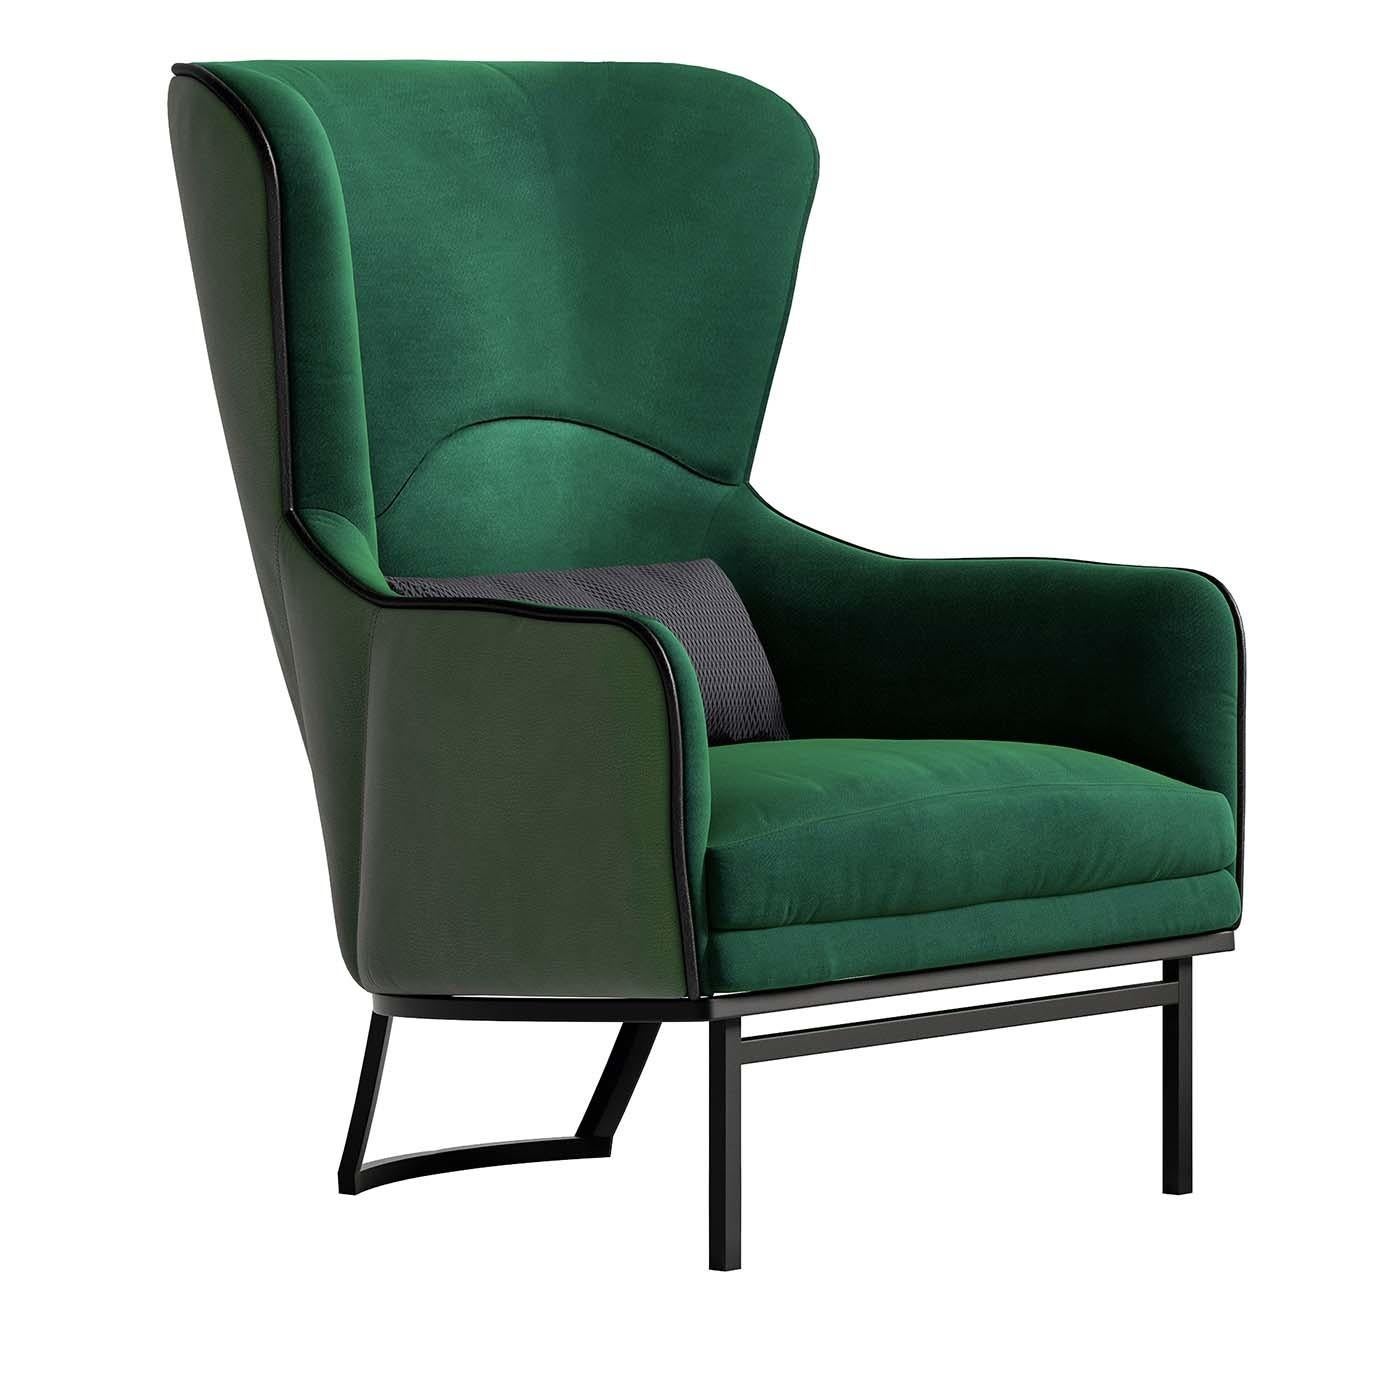 Simple and refined, this contemporary bergère style armchair exudes comfort and elegance. The inviting silhouette with a tall, winged back is supported by a black-finished metal base with two front legs and a U-shaped slanted foot. Upholstered with